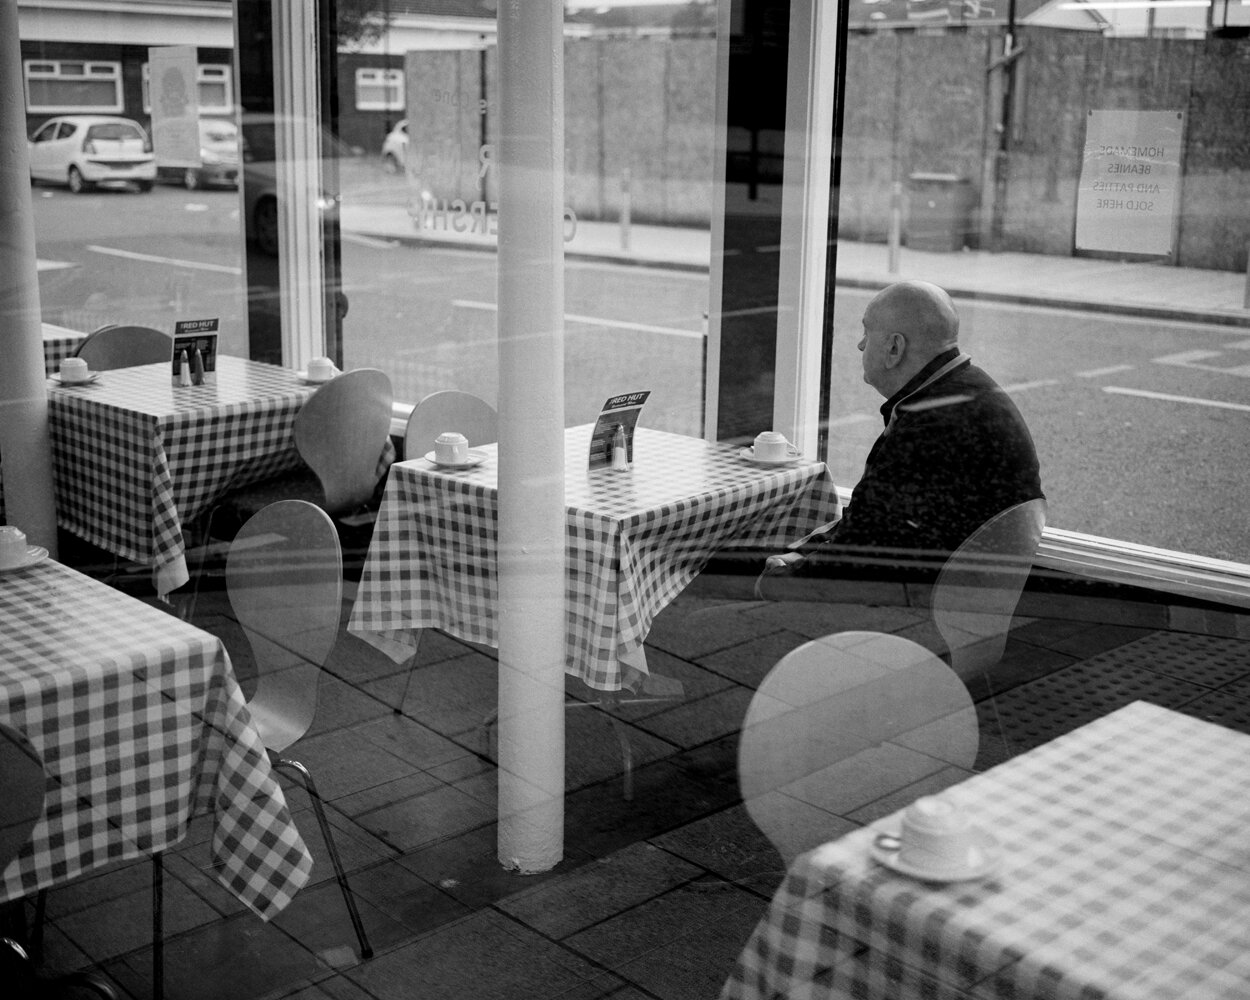 A Man In A Cafe By Himself - Newcastle.jpg